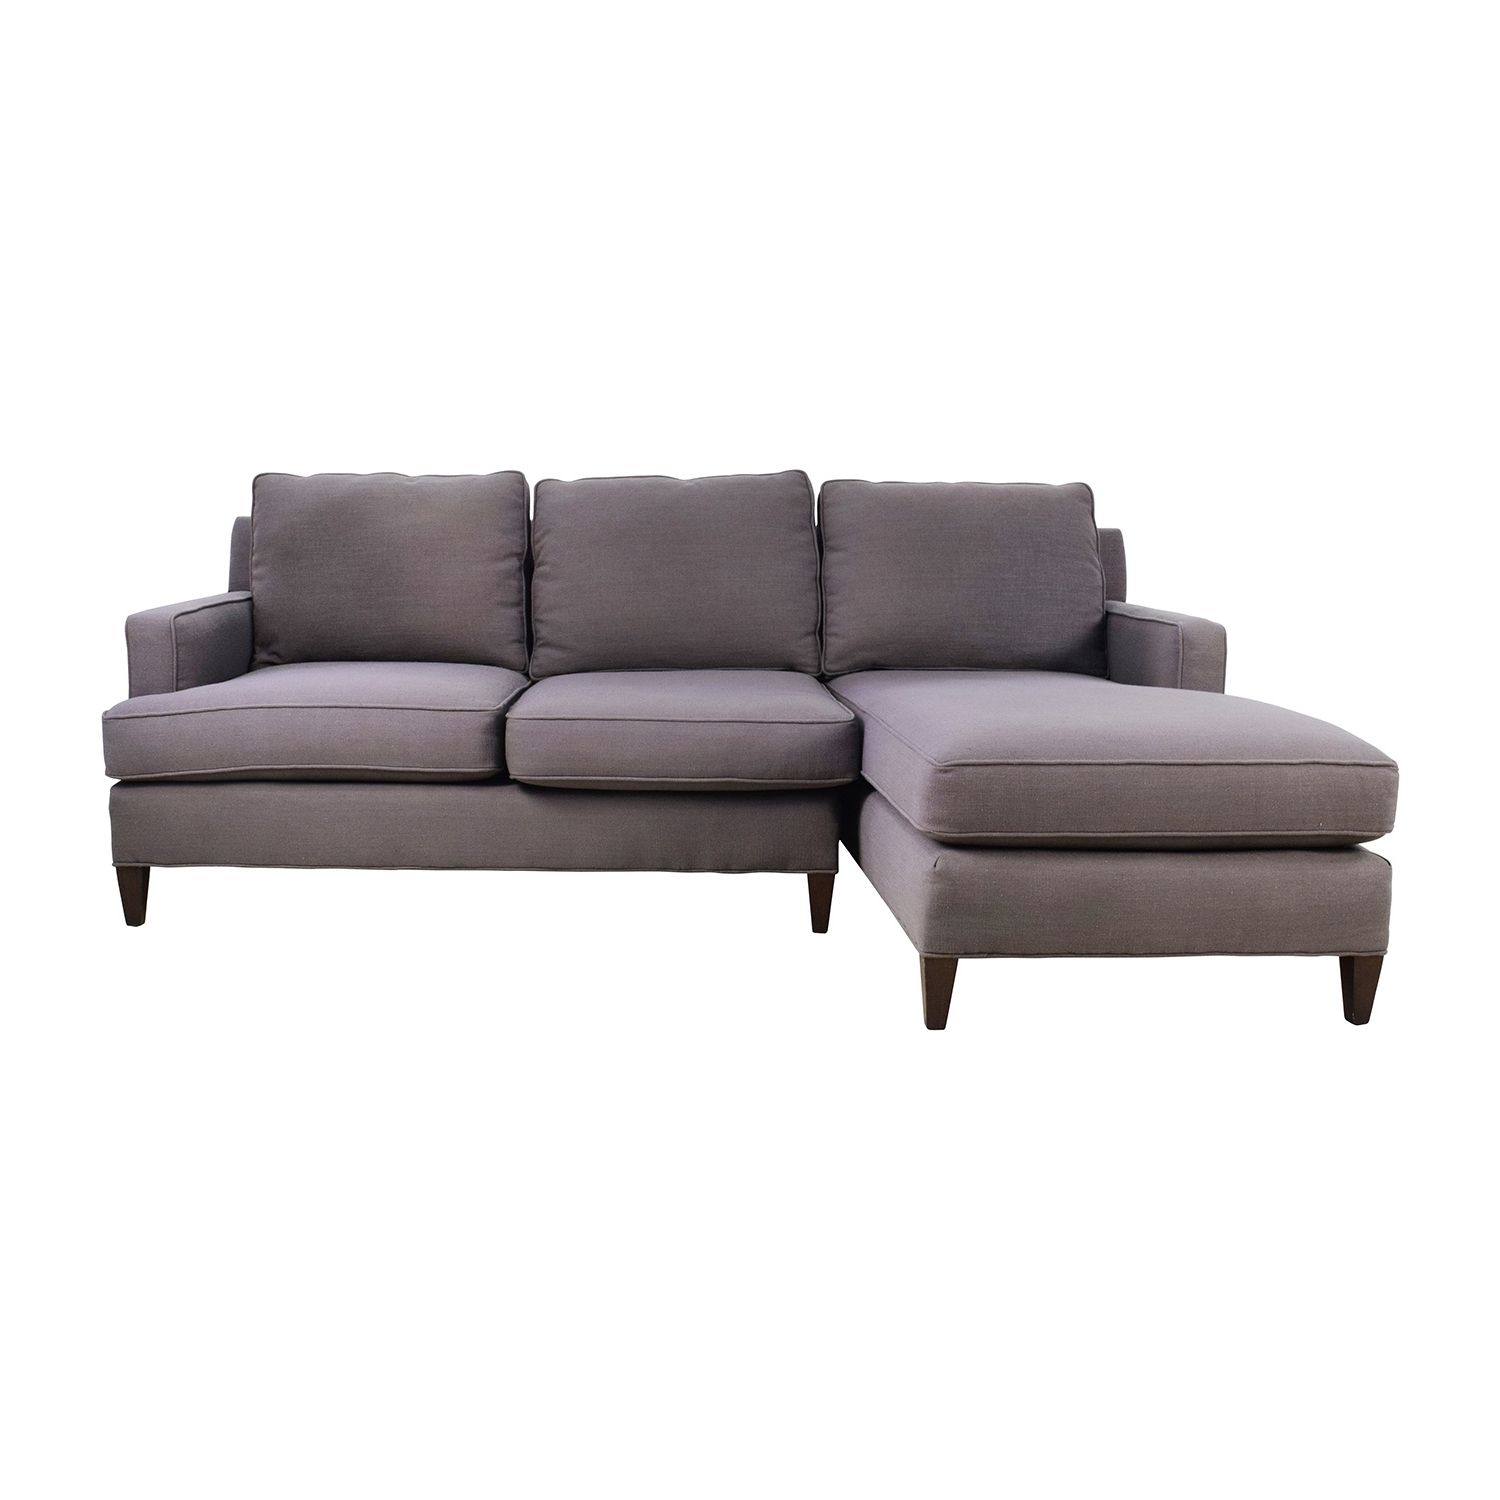 [%81% Off – Mitchell Gold & Bob Williams Mitchell Gold + Bob Inside Most Popular Sectional Sofas At Charlotte Nc|sectional Sofas At Charlotte Nc With Regard To Famous 81% Off – Mitchell Gold & Bob Williams Mitchell Gold + Bob|well Known Sectional Sofas At Charlotte Nc Throughout 81% Off – Mitchell Gold & Bob Williams Mitchell Gold + Bob|well Known 81% Off – Mitchell Gold & Bob Williams Mitchell Gold + Bob With Sectional Sofas At Charlotte Nc%] (View 15 of 20)